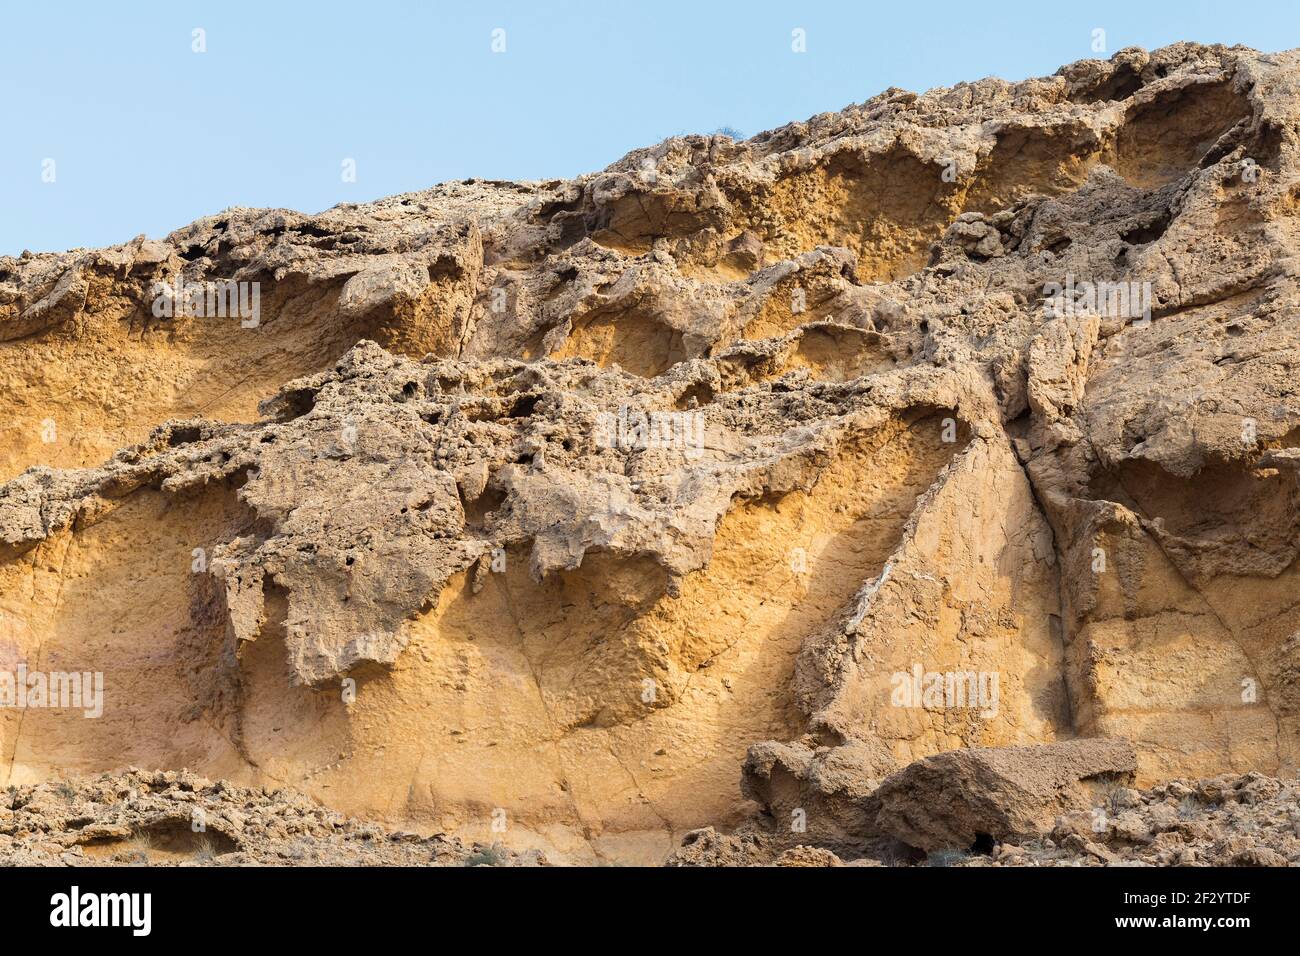 93 million years old rocks formations known as Jebels in Buhais area of Sharjah emirate, Stock Photo